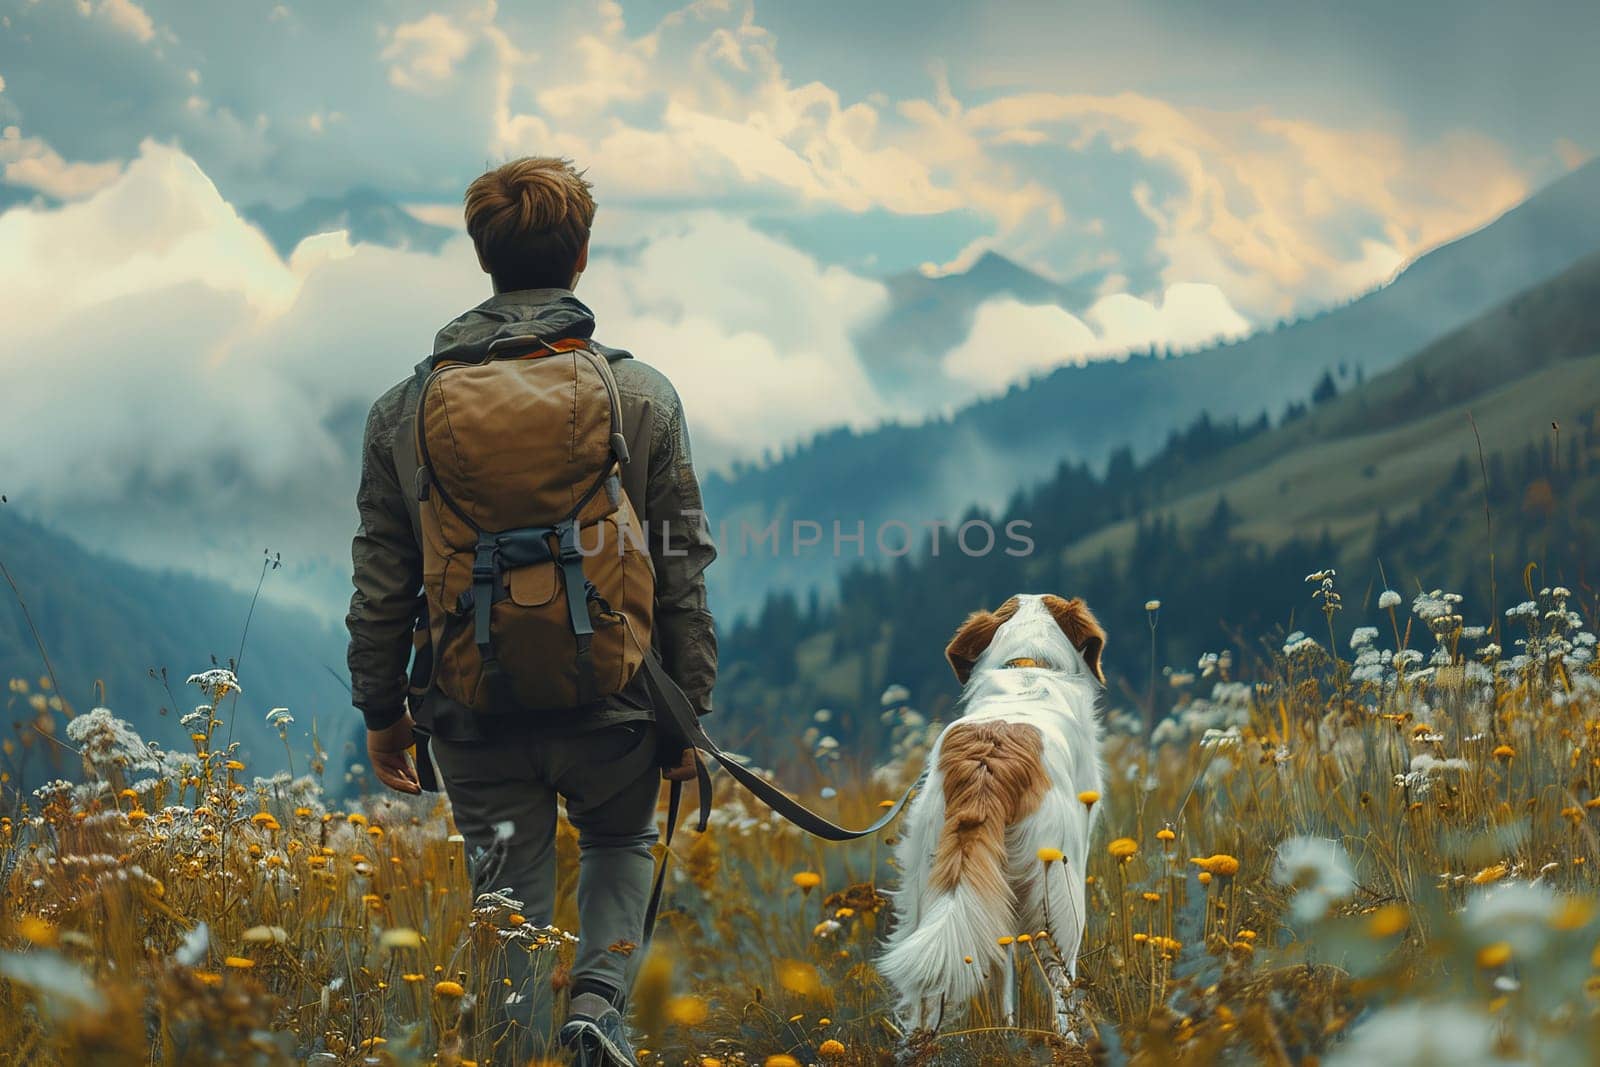 A man and his dog are walking through a field of yellow flowers by itchaznong